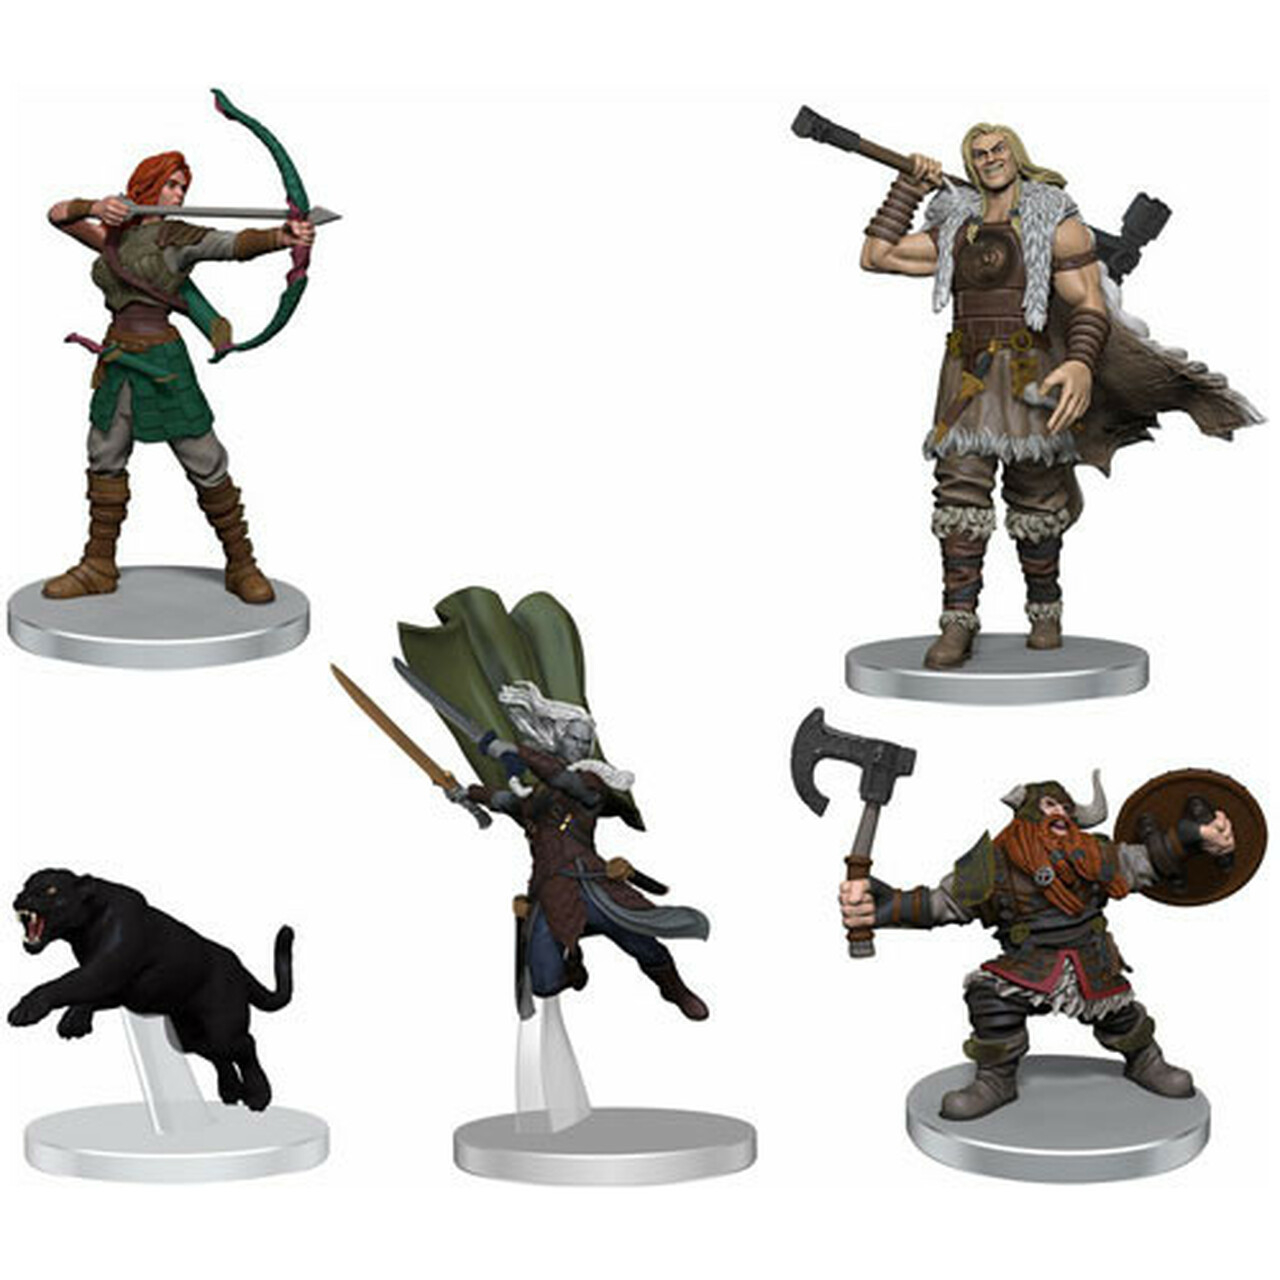 WizKids Magic: The Gathering Miniatures: Adventures in the Forgotten Realms - Companions of the Hall Starter